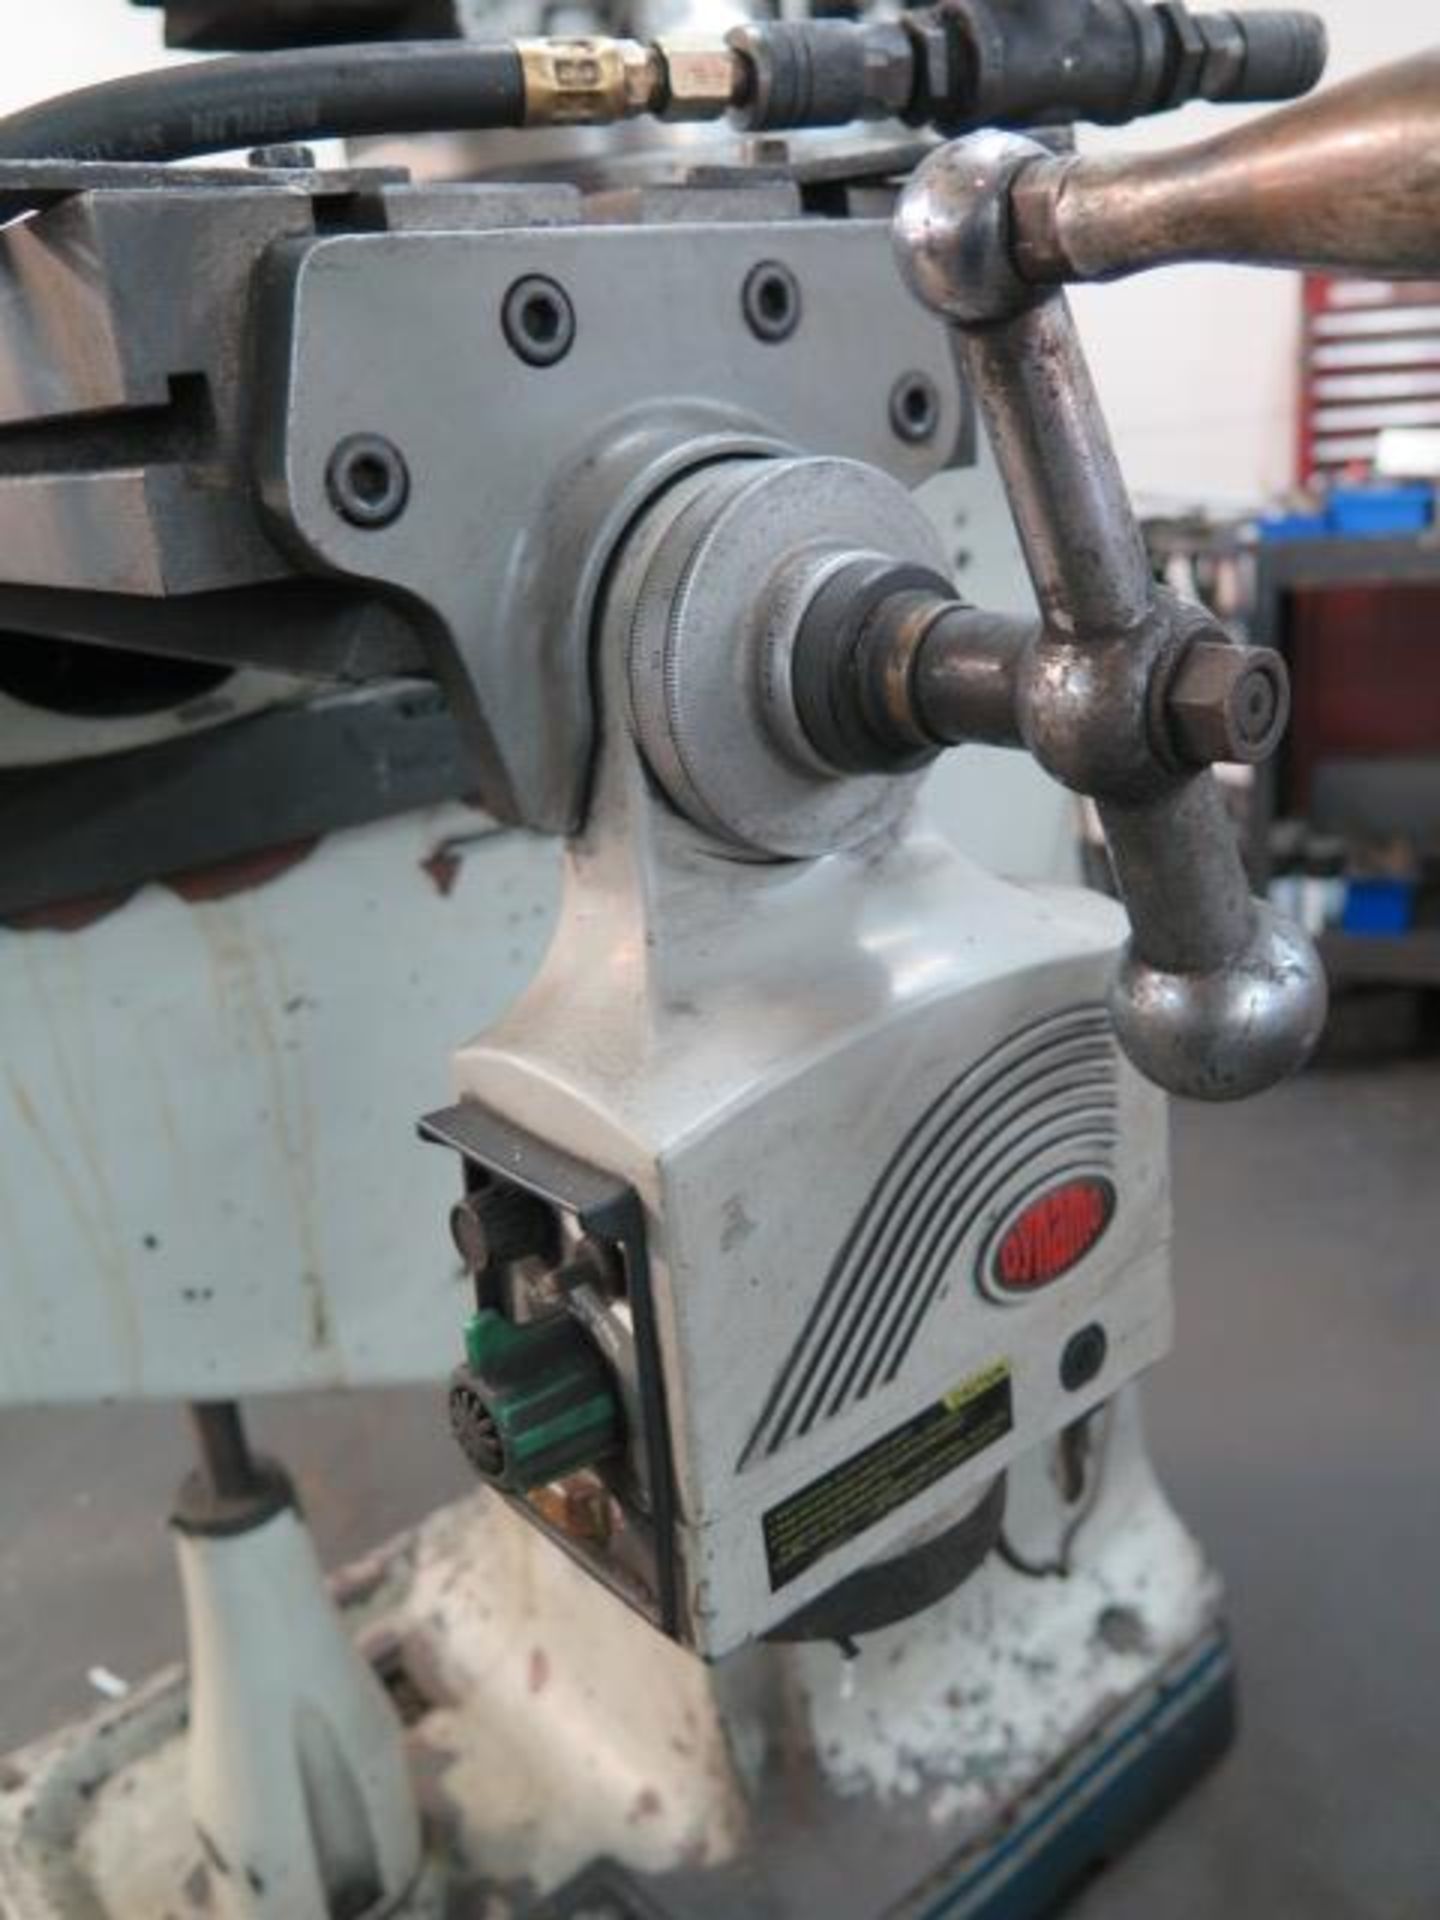 Acra AM-2S Vertical Mill s/n 96-1073-1 w/ 1Hp Motor, 80-5440 RPM, 16-Speeds, Power Feed, SOLD AS IS - Image 10 of 12